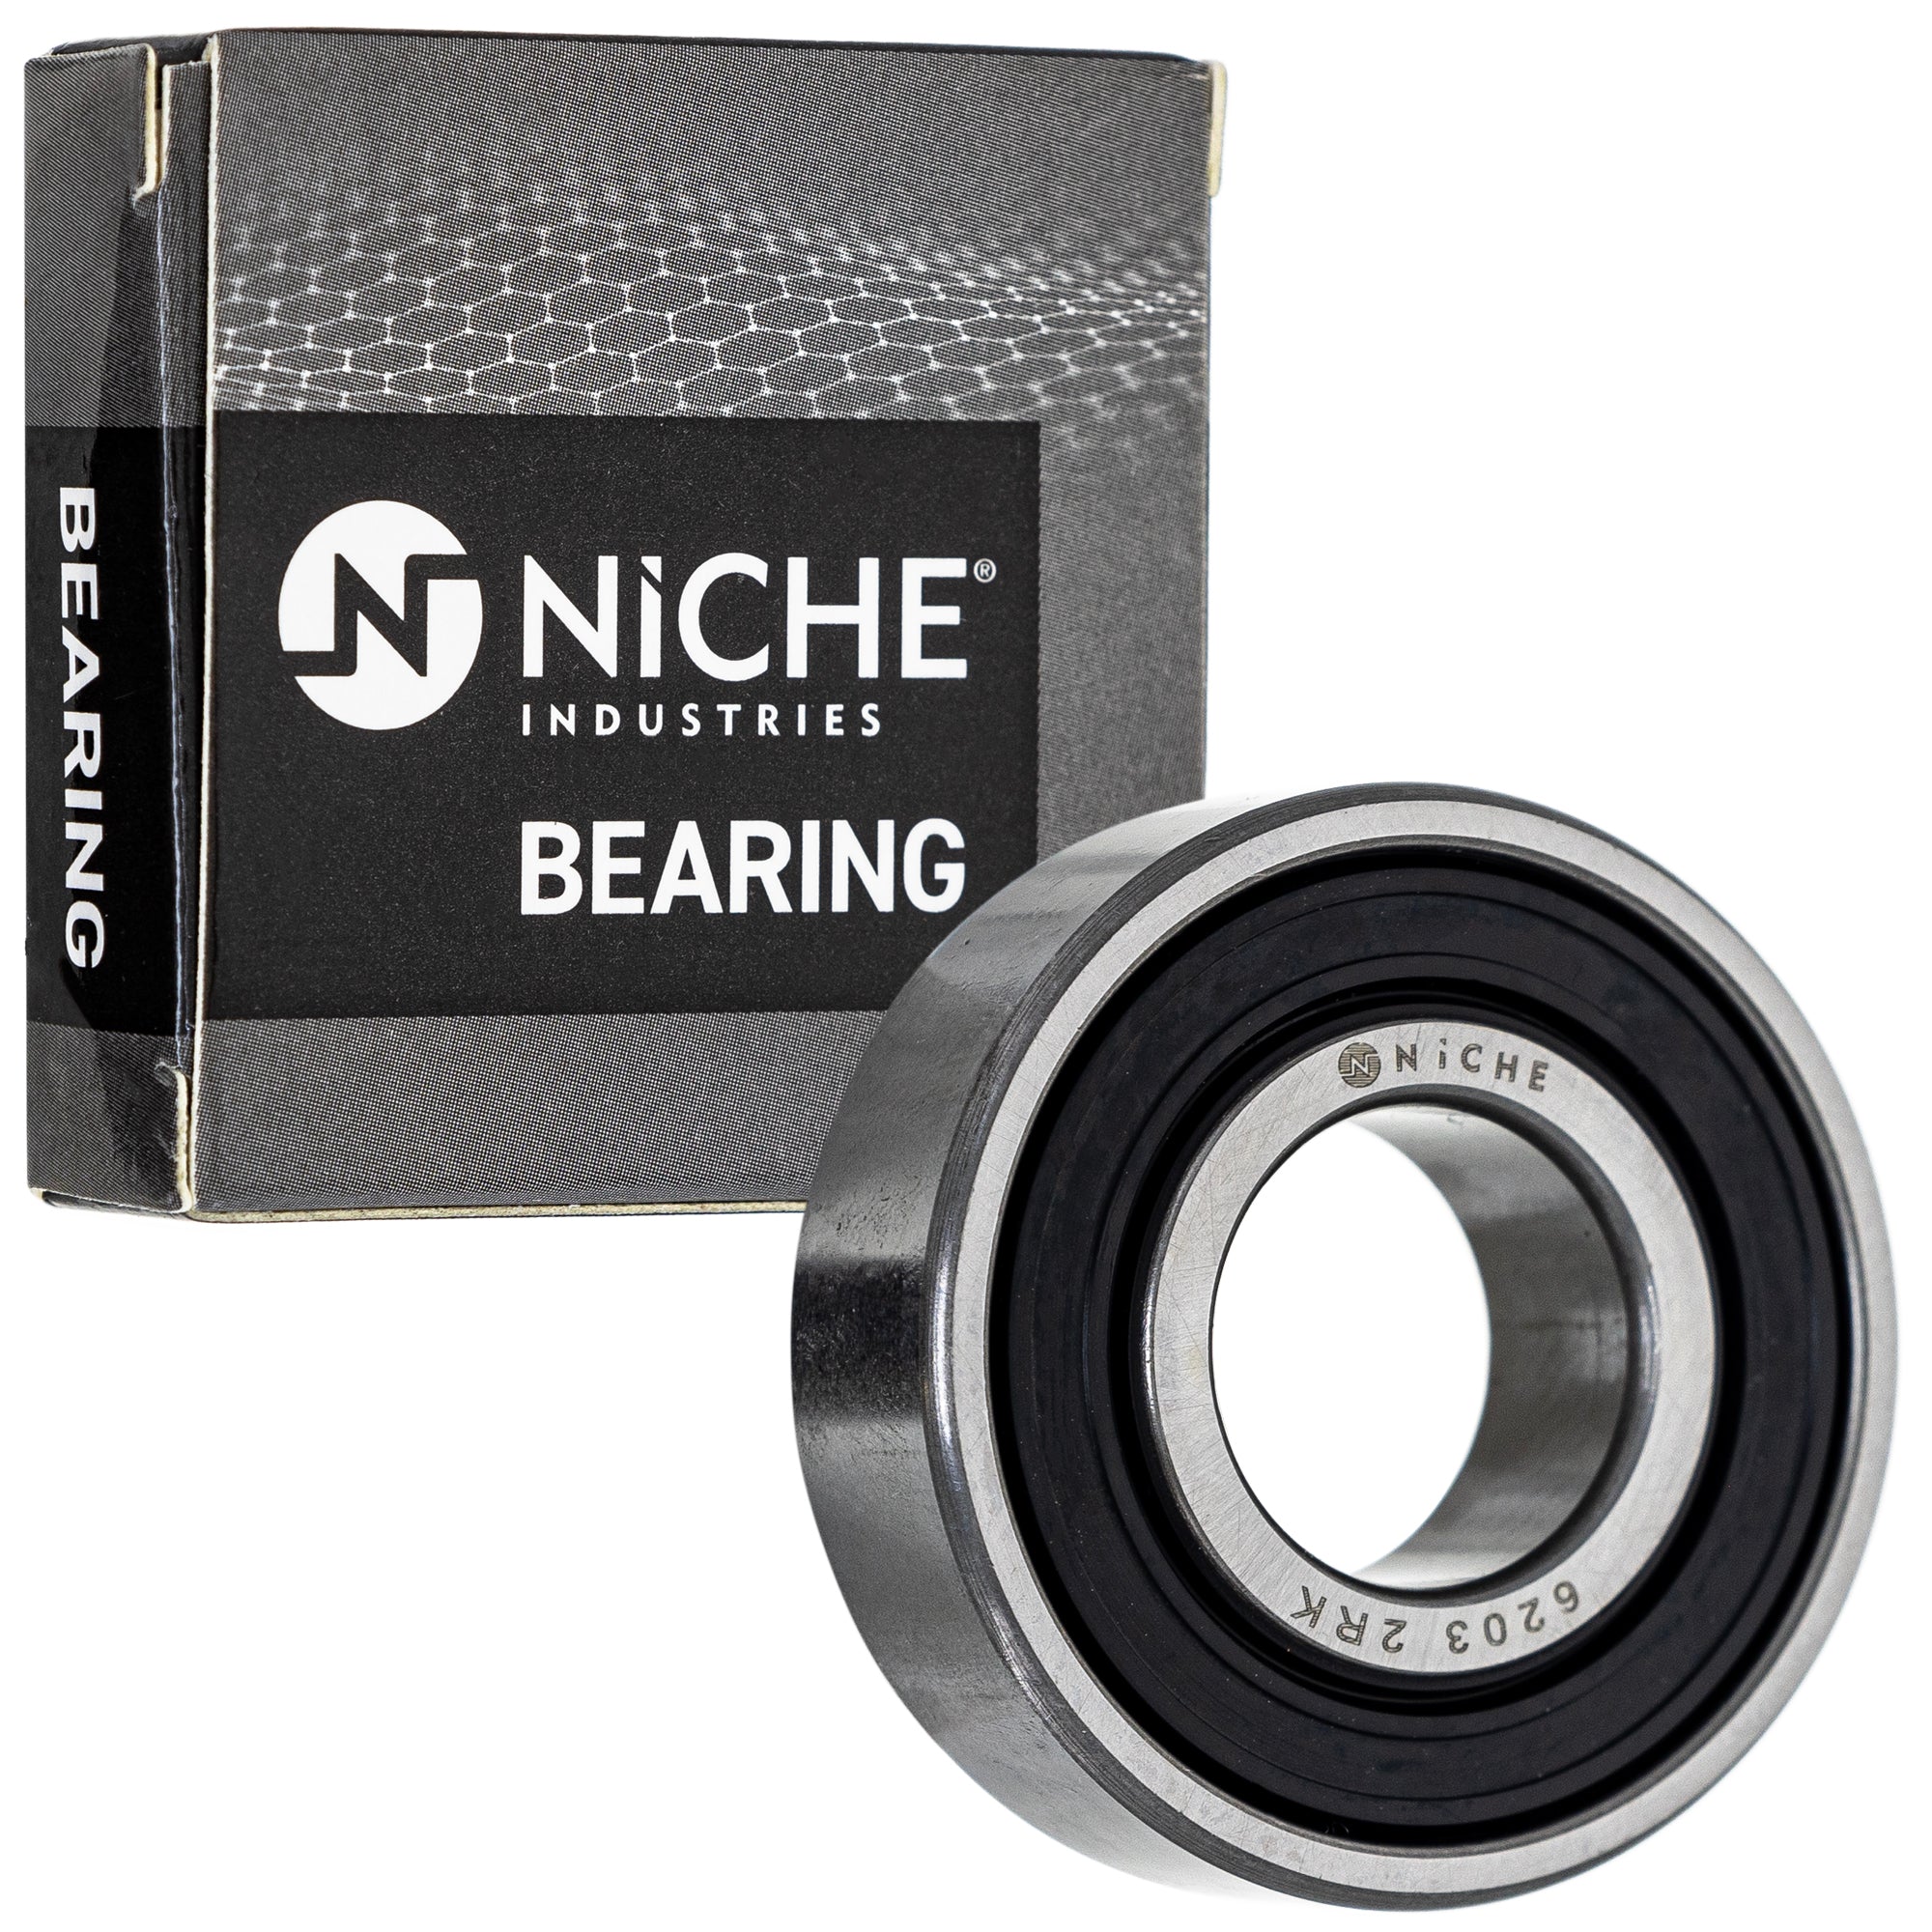 NICHE 519-CBB2280R Bearing for zOTHER SRX600 Seca IT200 Grizzly